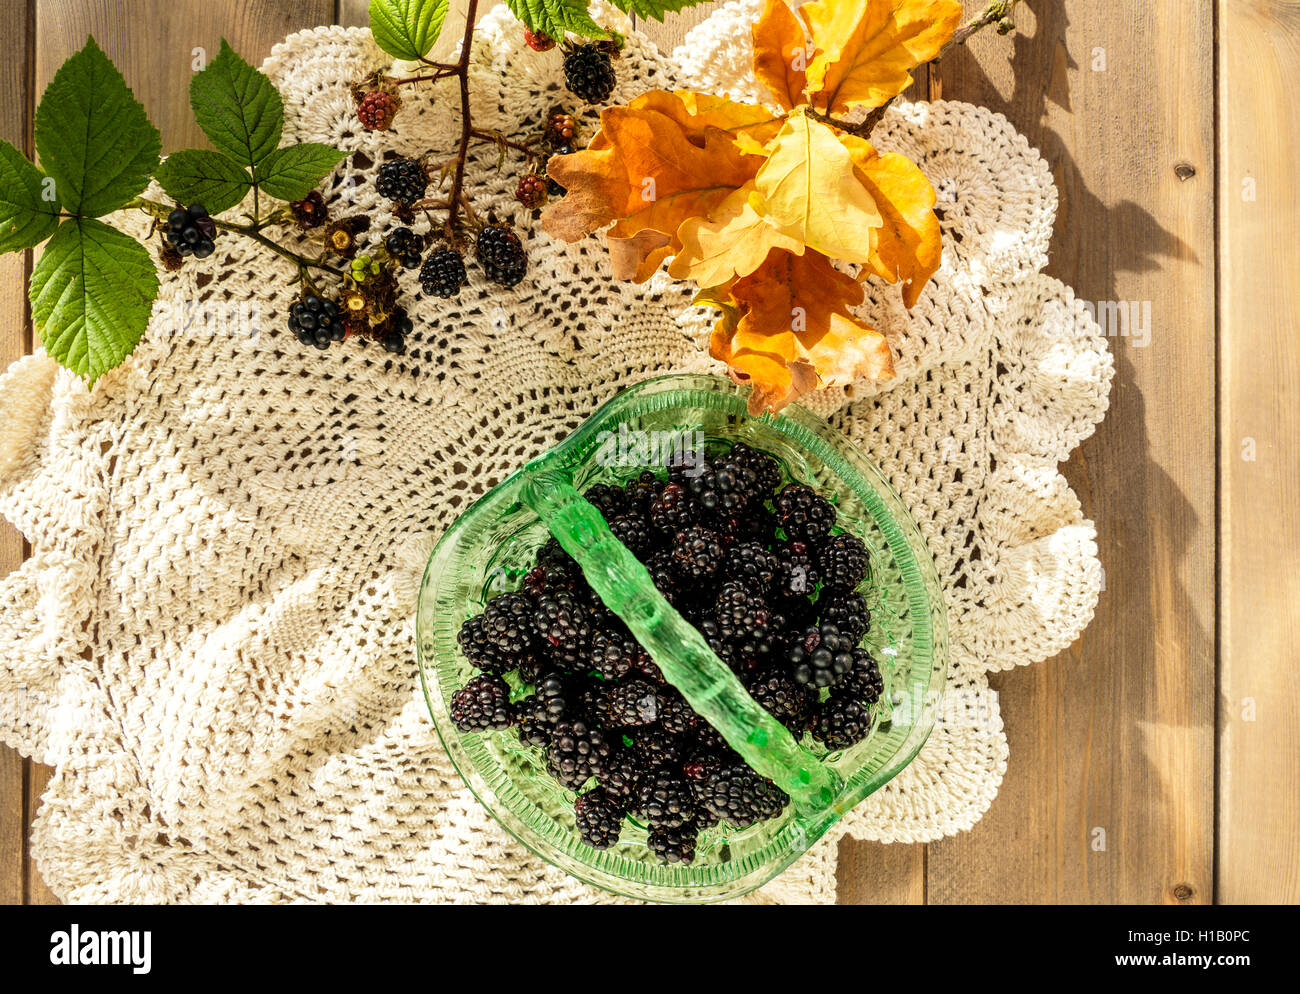 Vintage green glass basket dish full of juicy blackberries with oak leaves and blackberry sprigs on crocheted lace doily cloth o Stock Photo